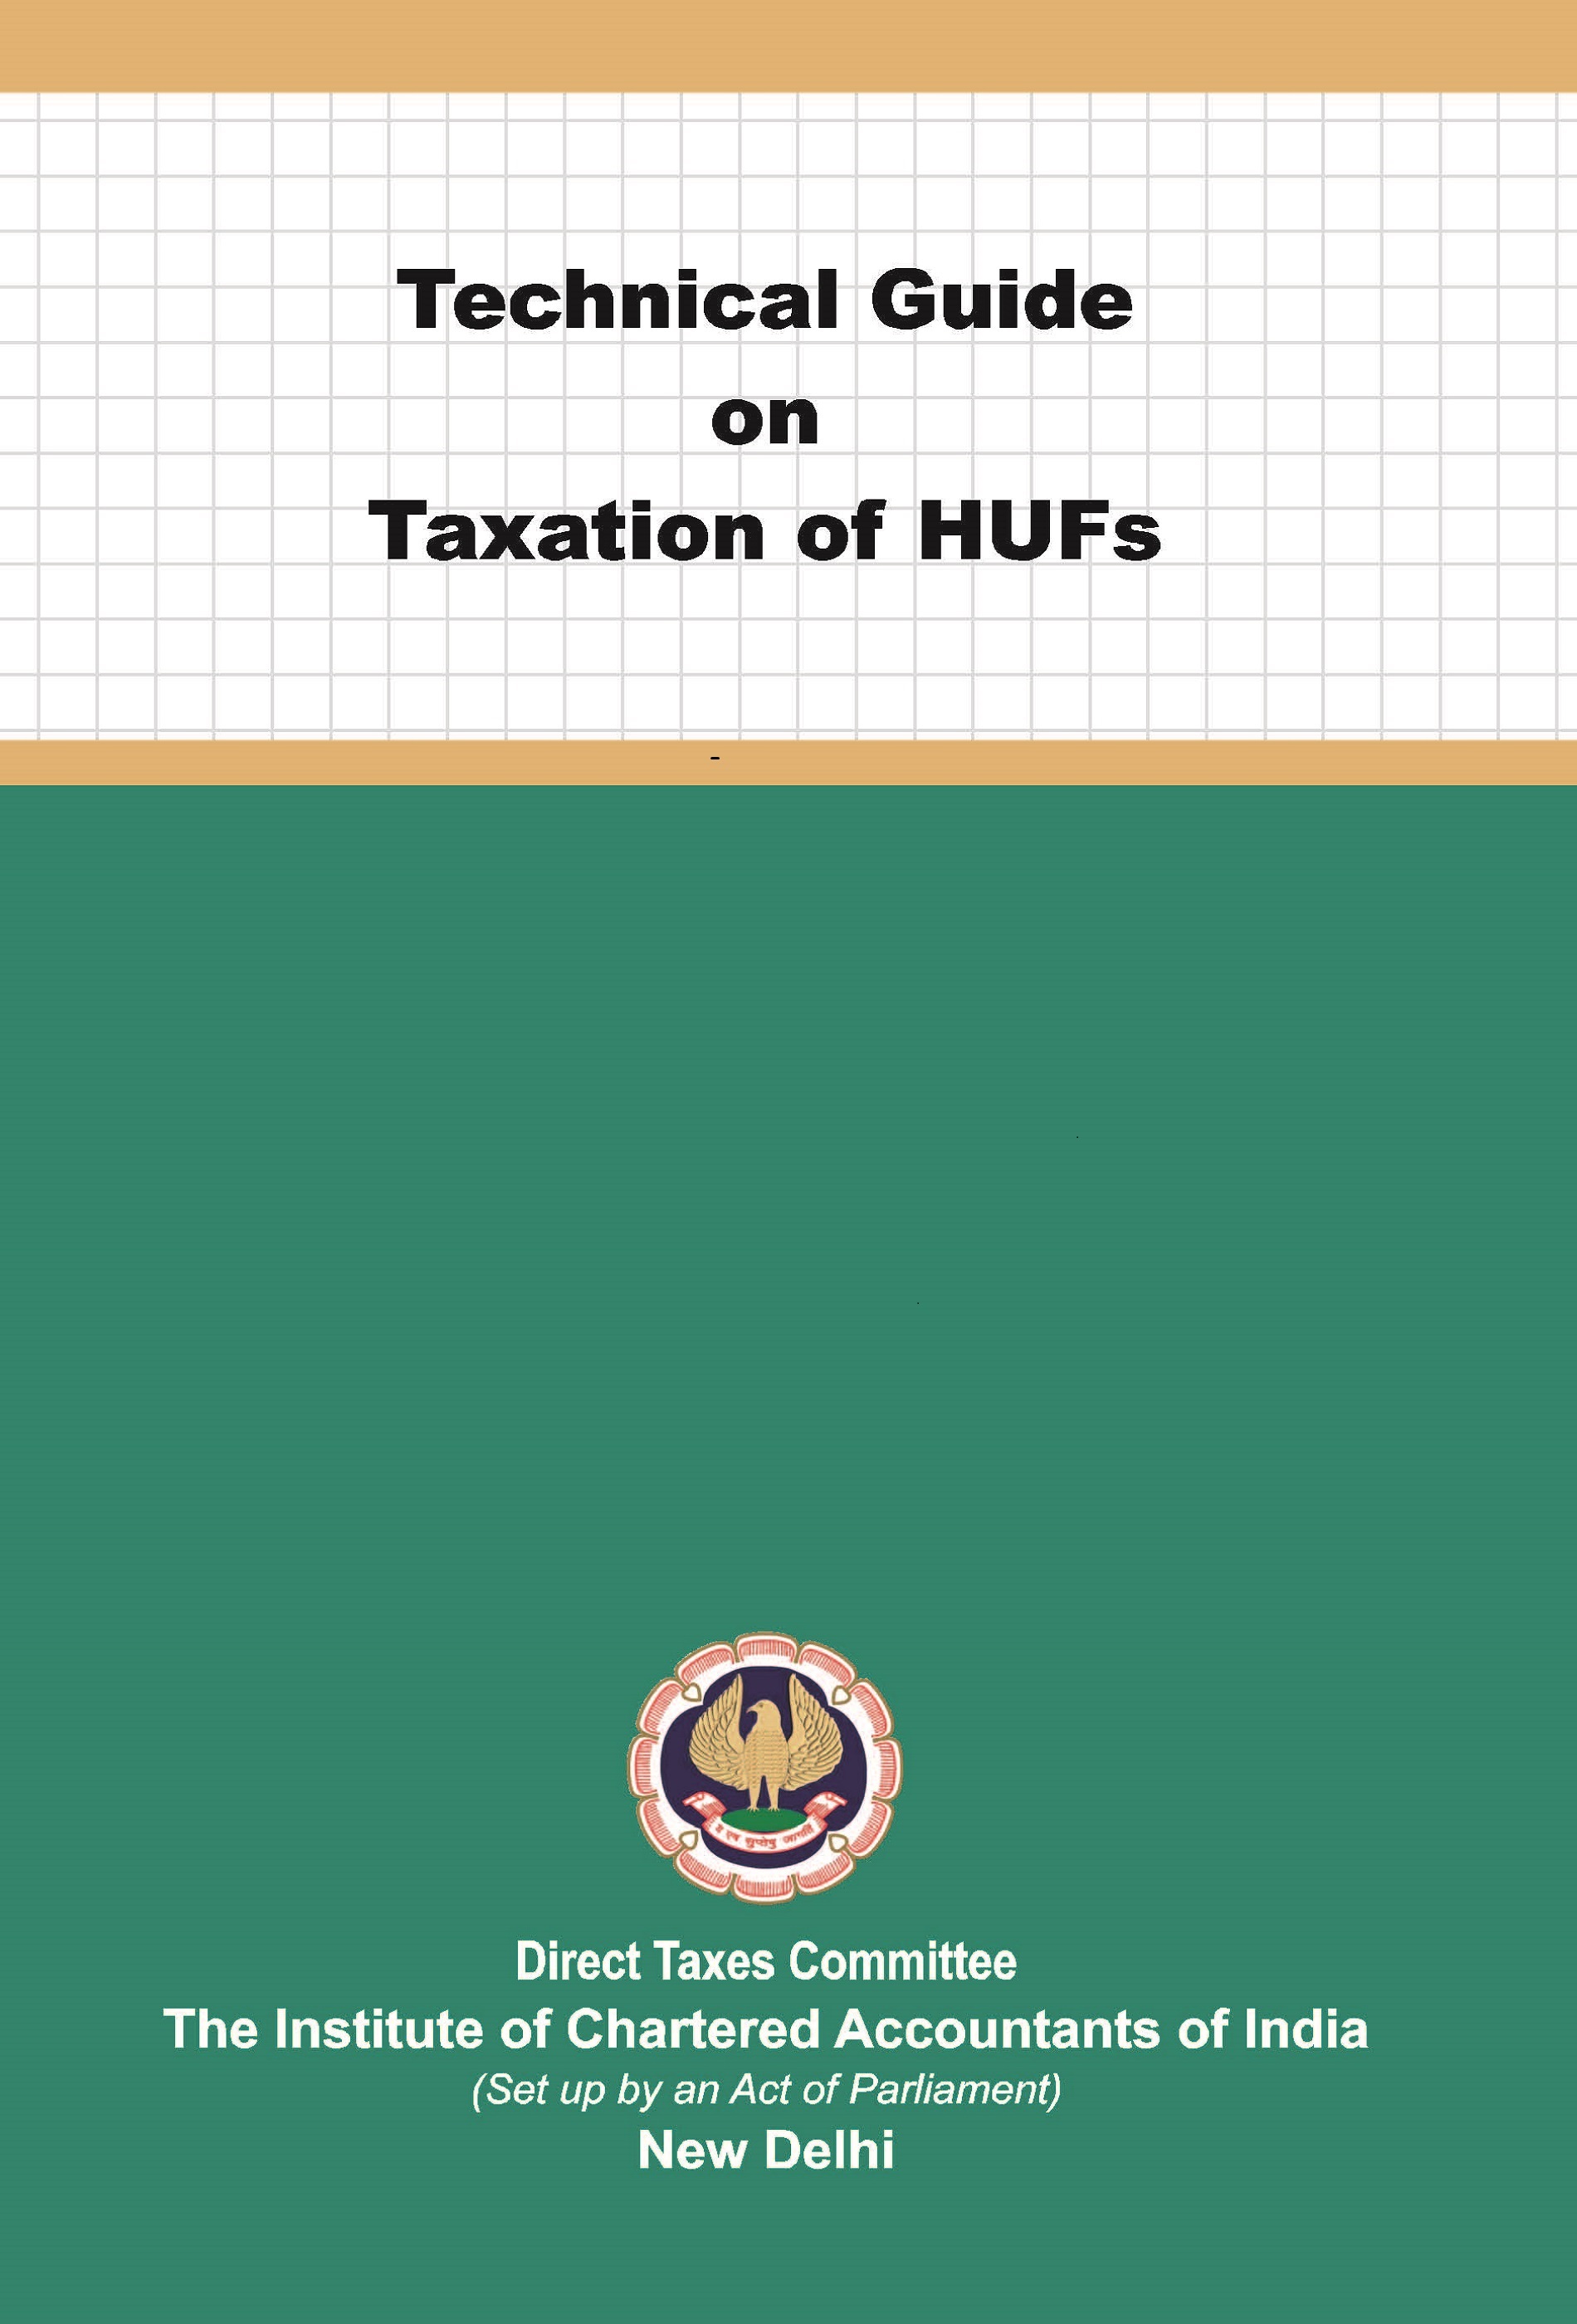 Technical Guide on Taxation of HUFs (August, 2021)